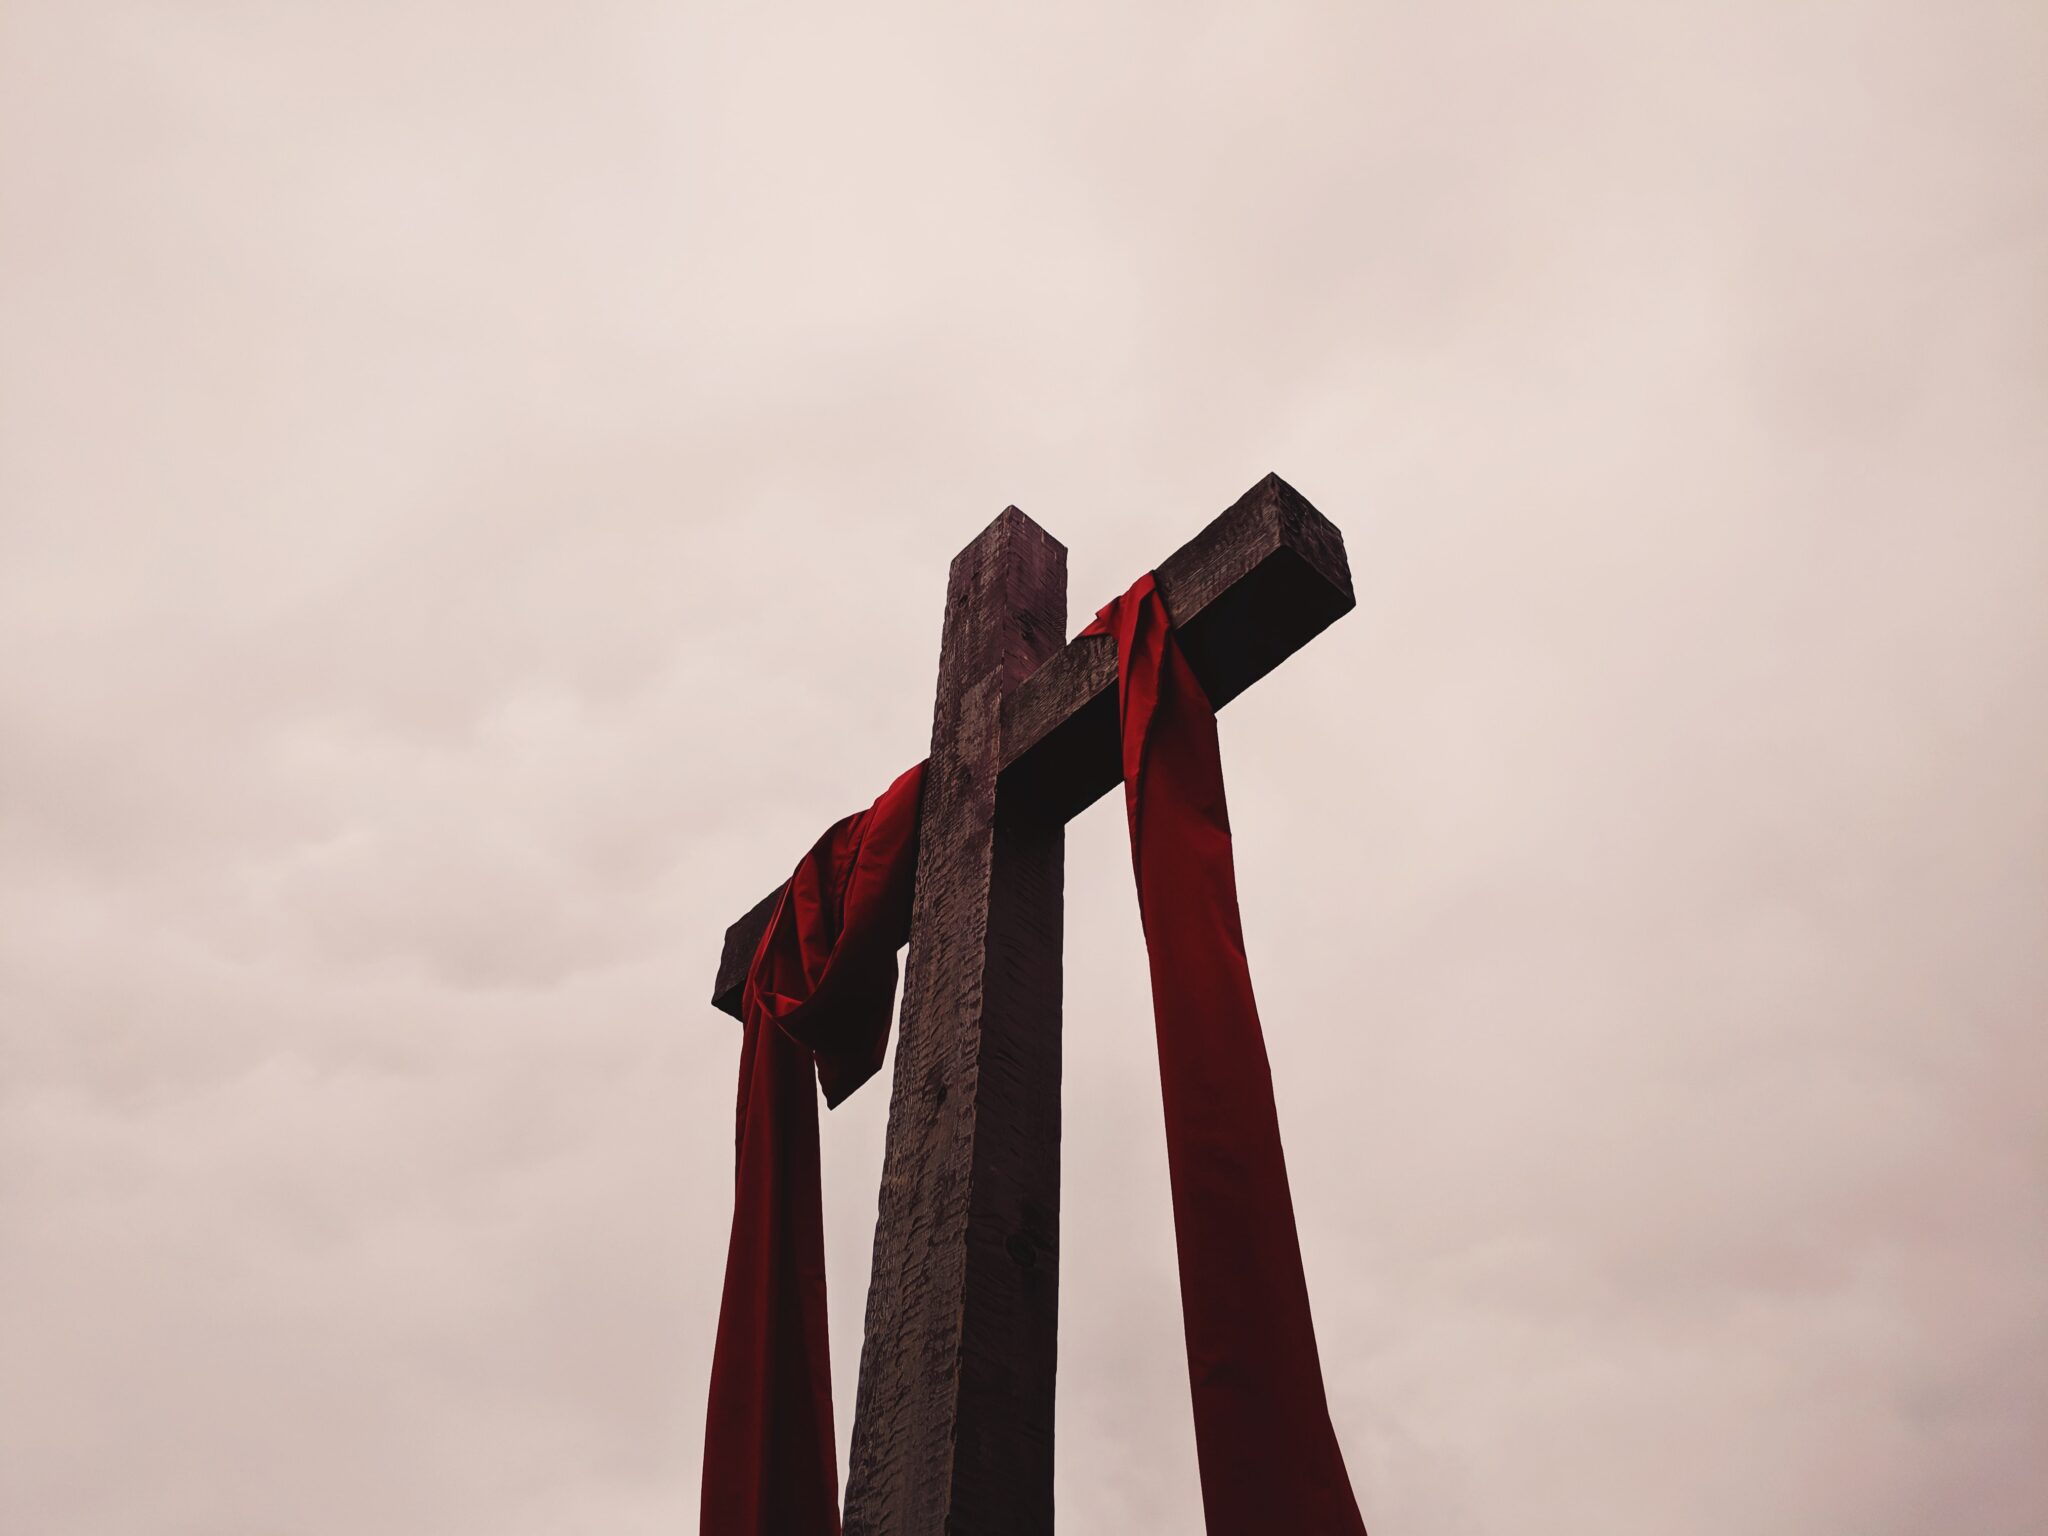 Cross with red cloth draping down